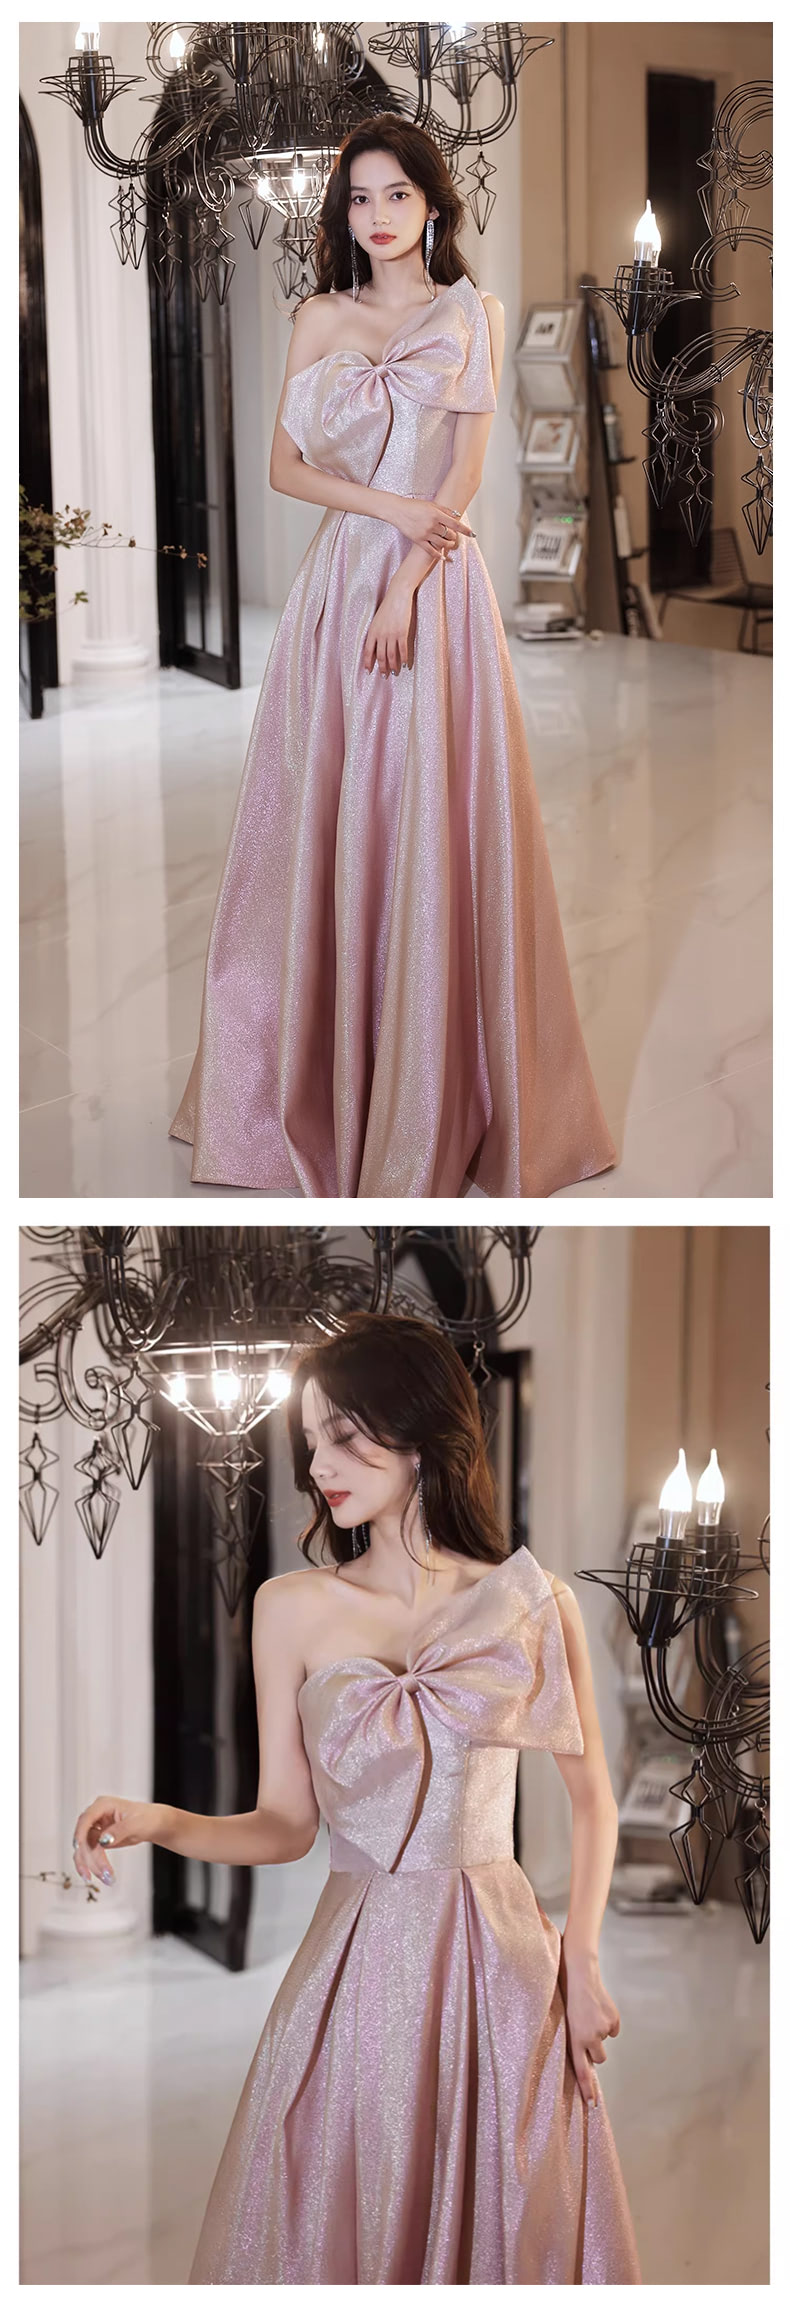 Pink-One-Shoulder-Evening-Dress-Sleeveless-Bow-Cocktail-Party-Gown12